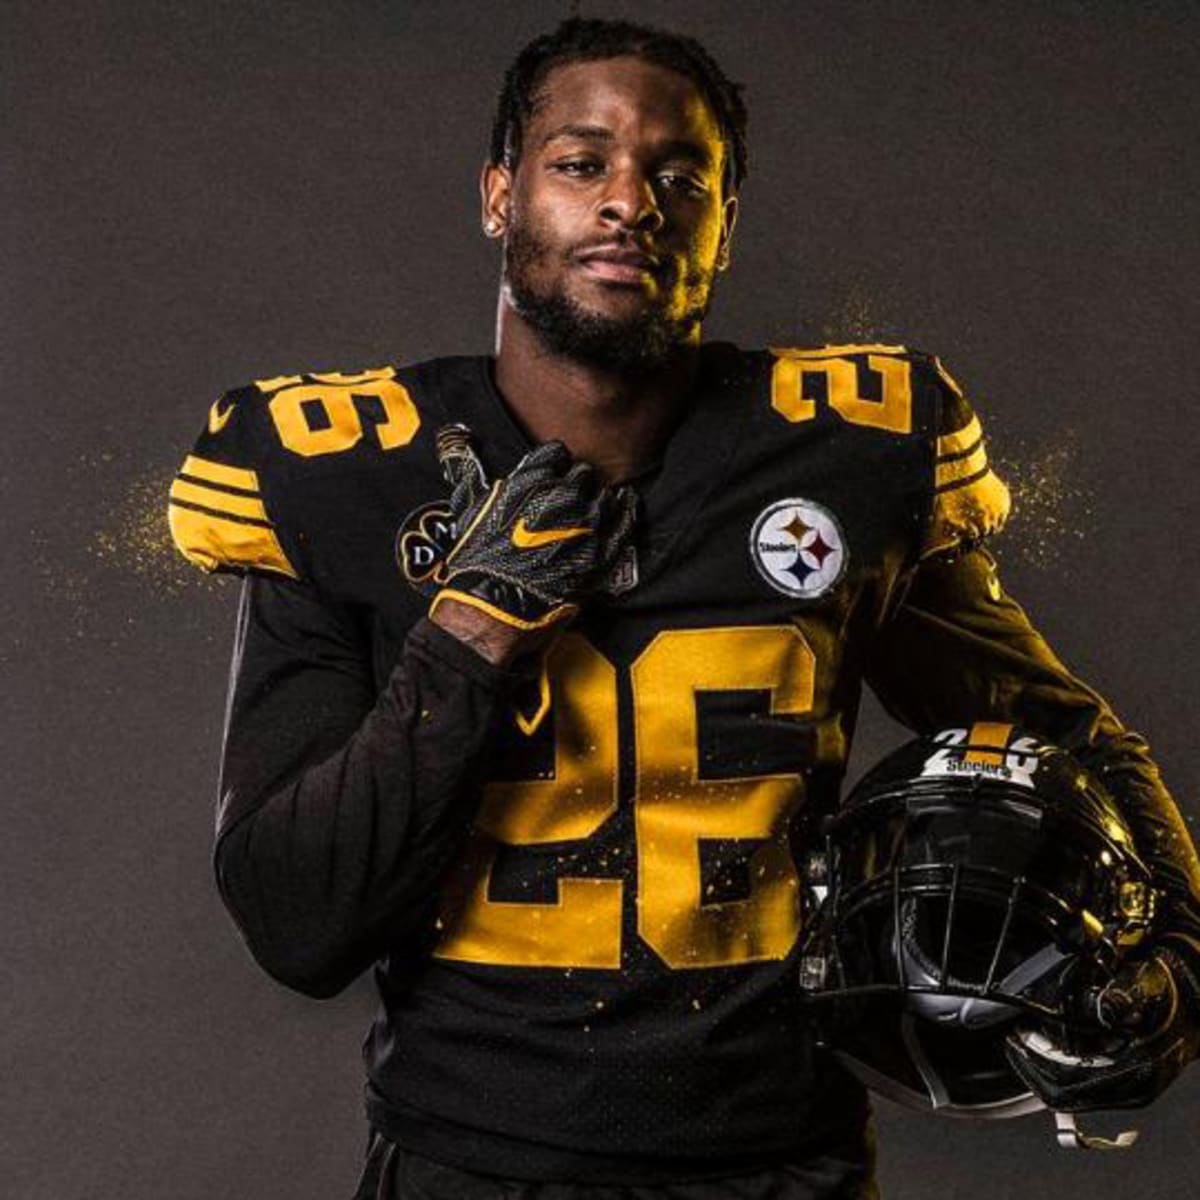 The Steelers to don Color Rush jerseys on Sunday